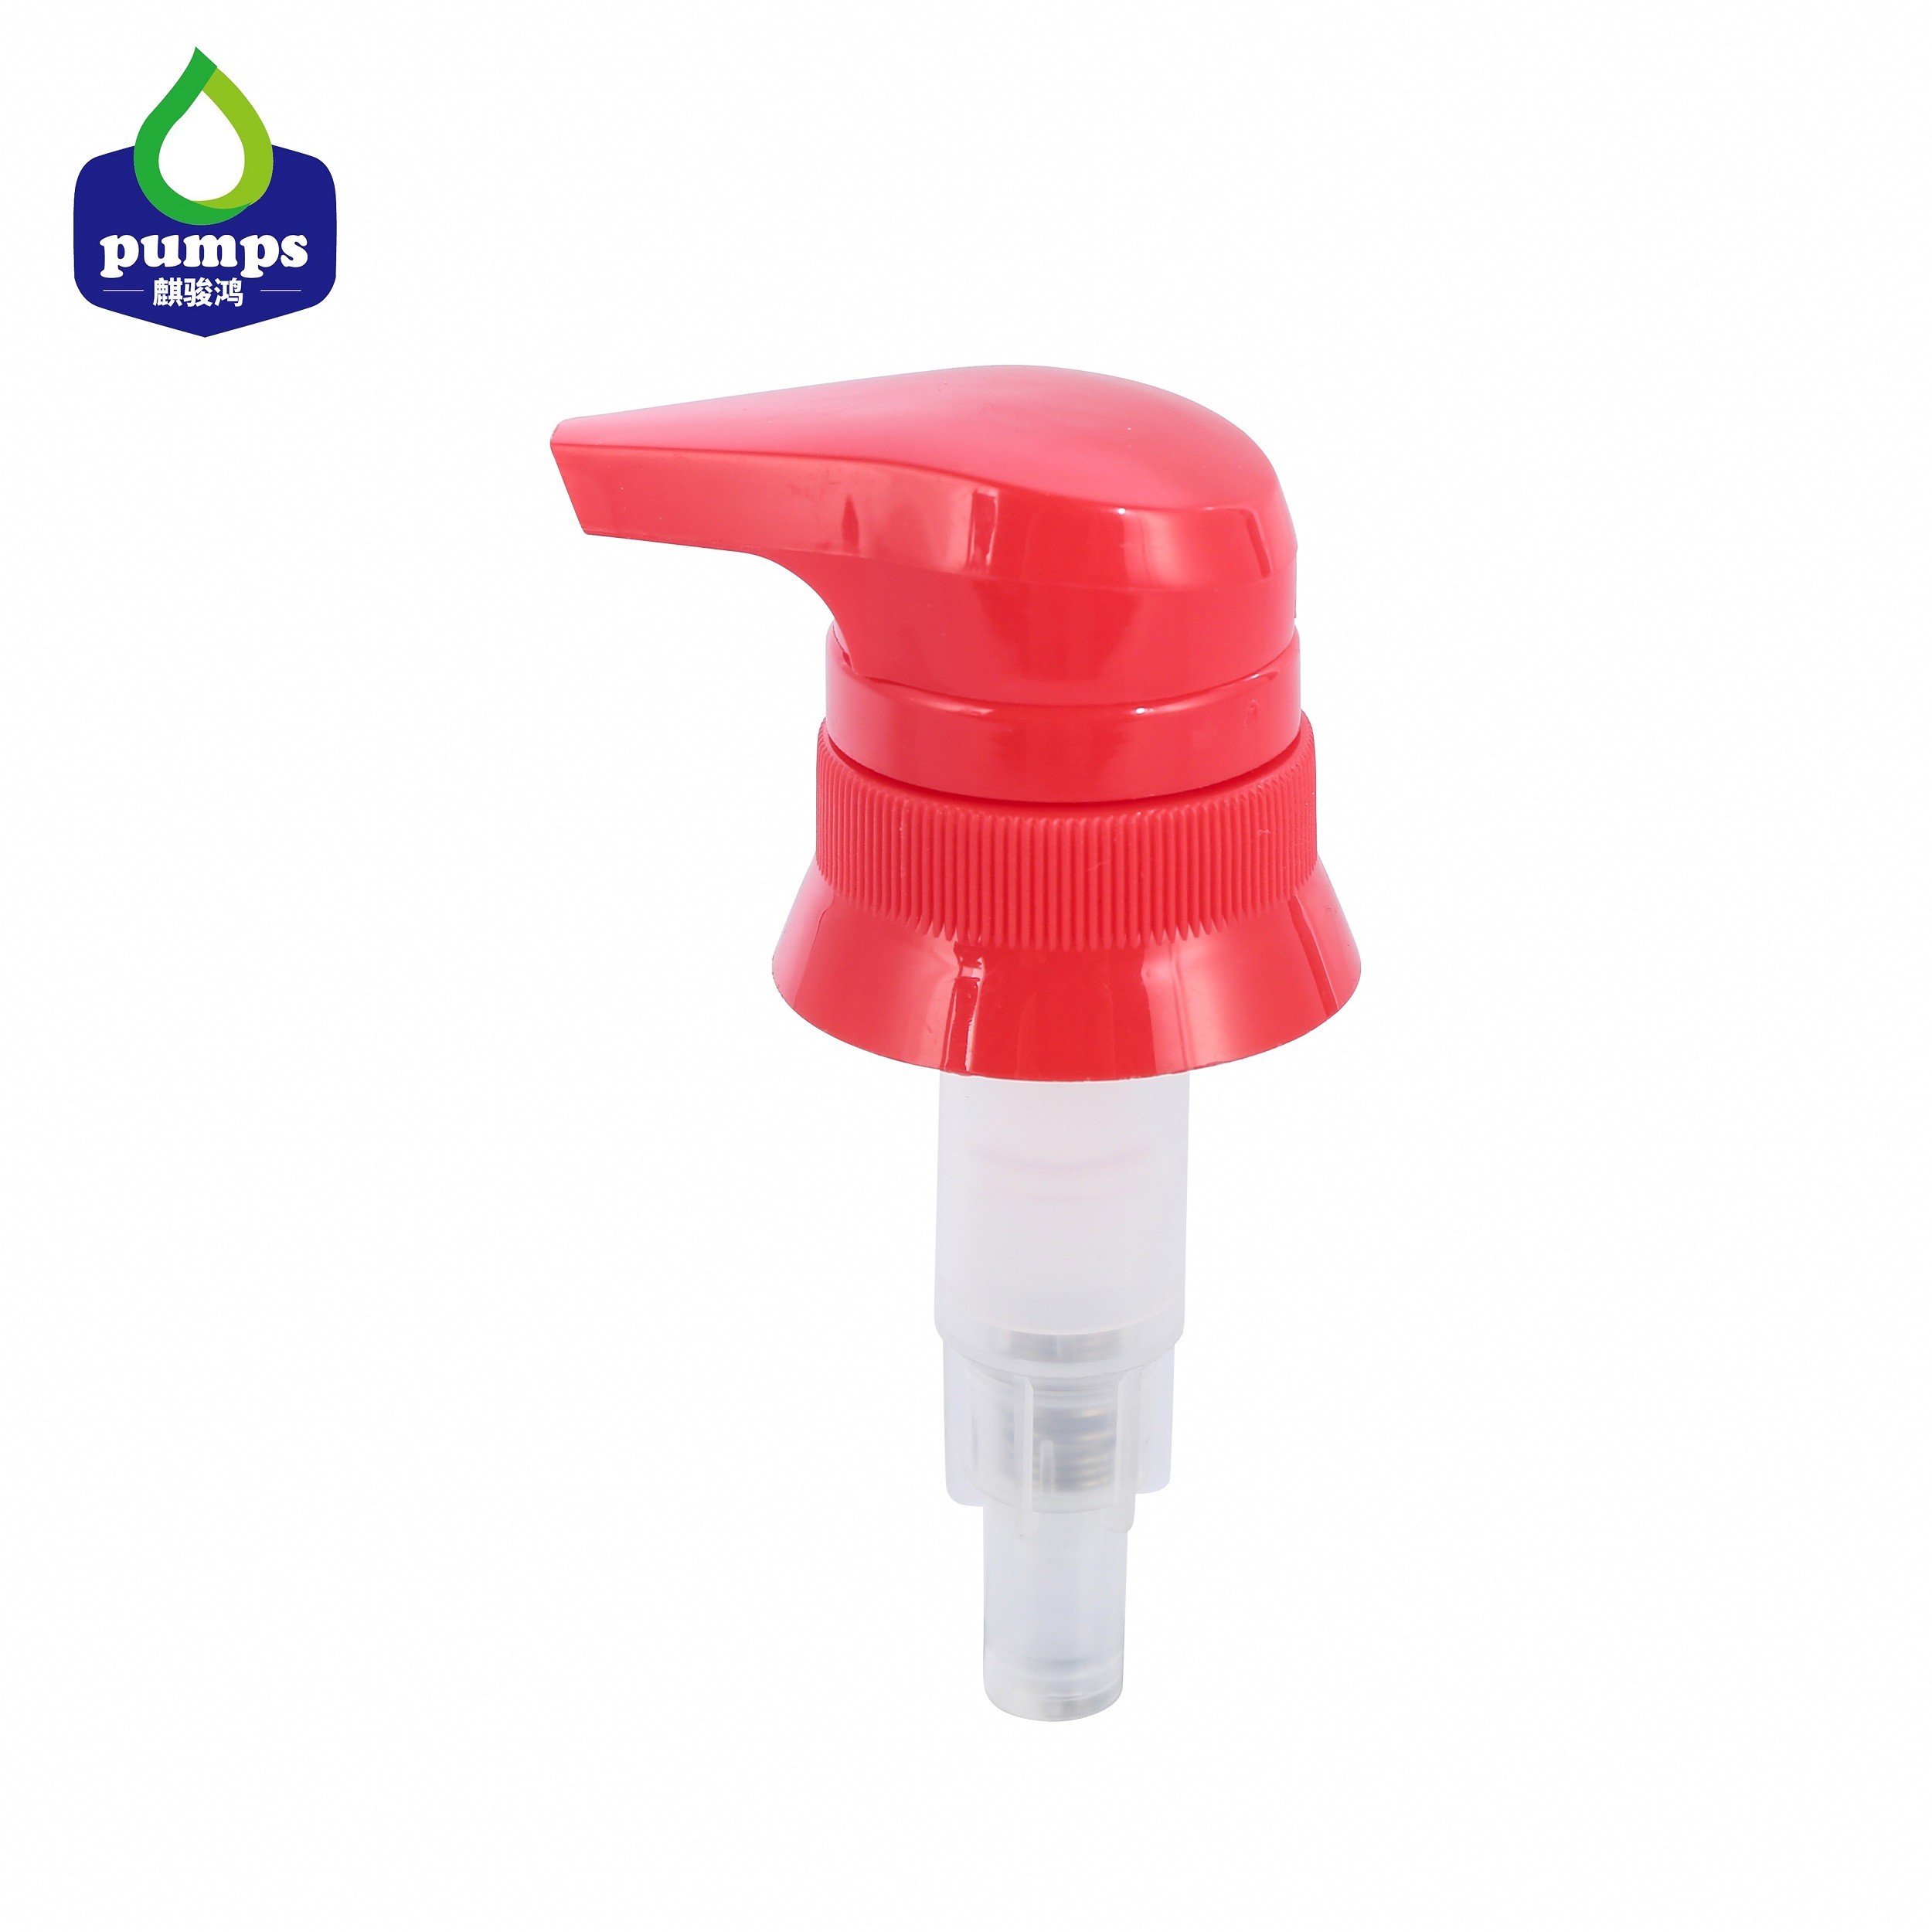 Cheap Red Color Baby Care Product PP Bottle Dispenser 500ml 4cc Dosage for sale